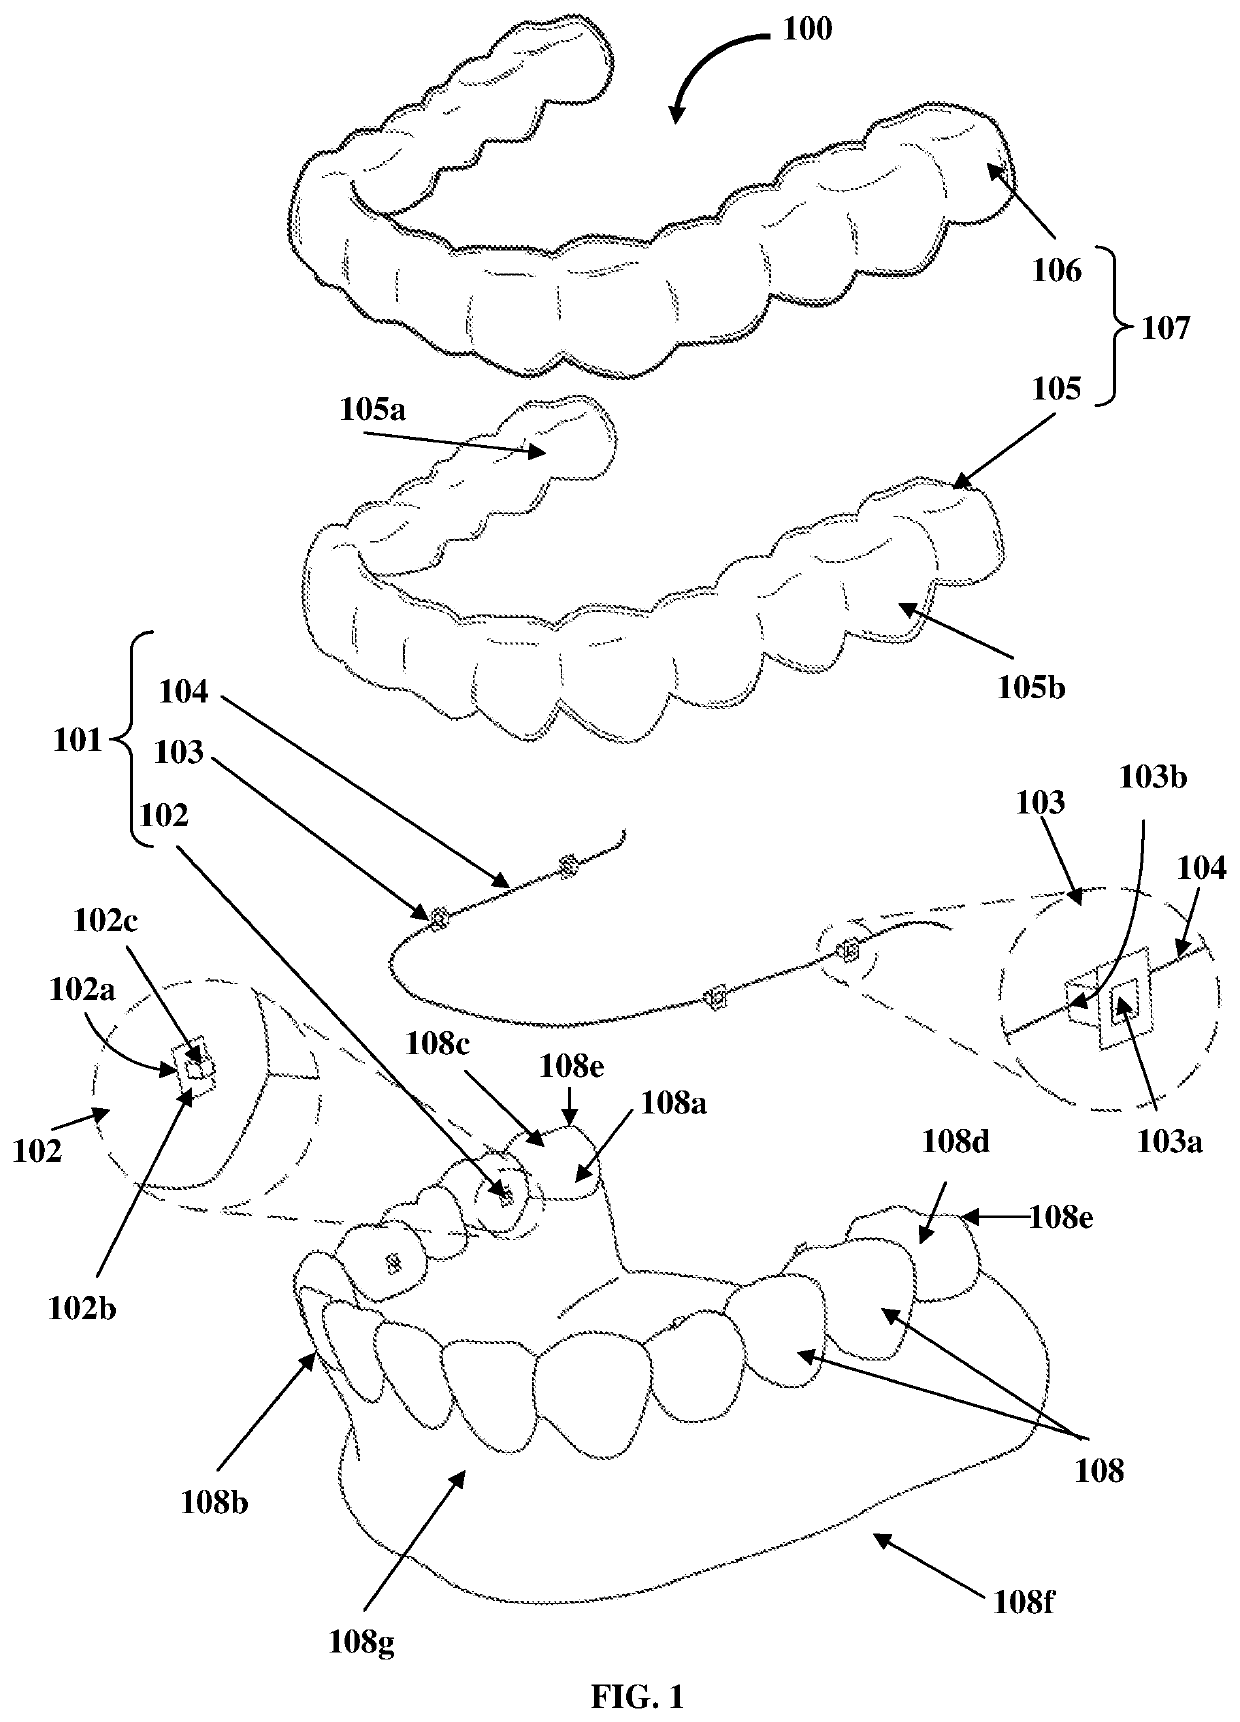 Detachable orthodontic bracket and wire system